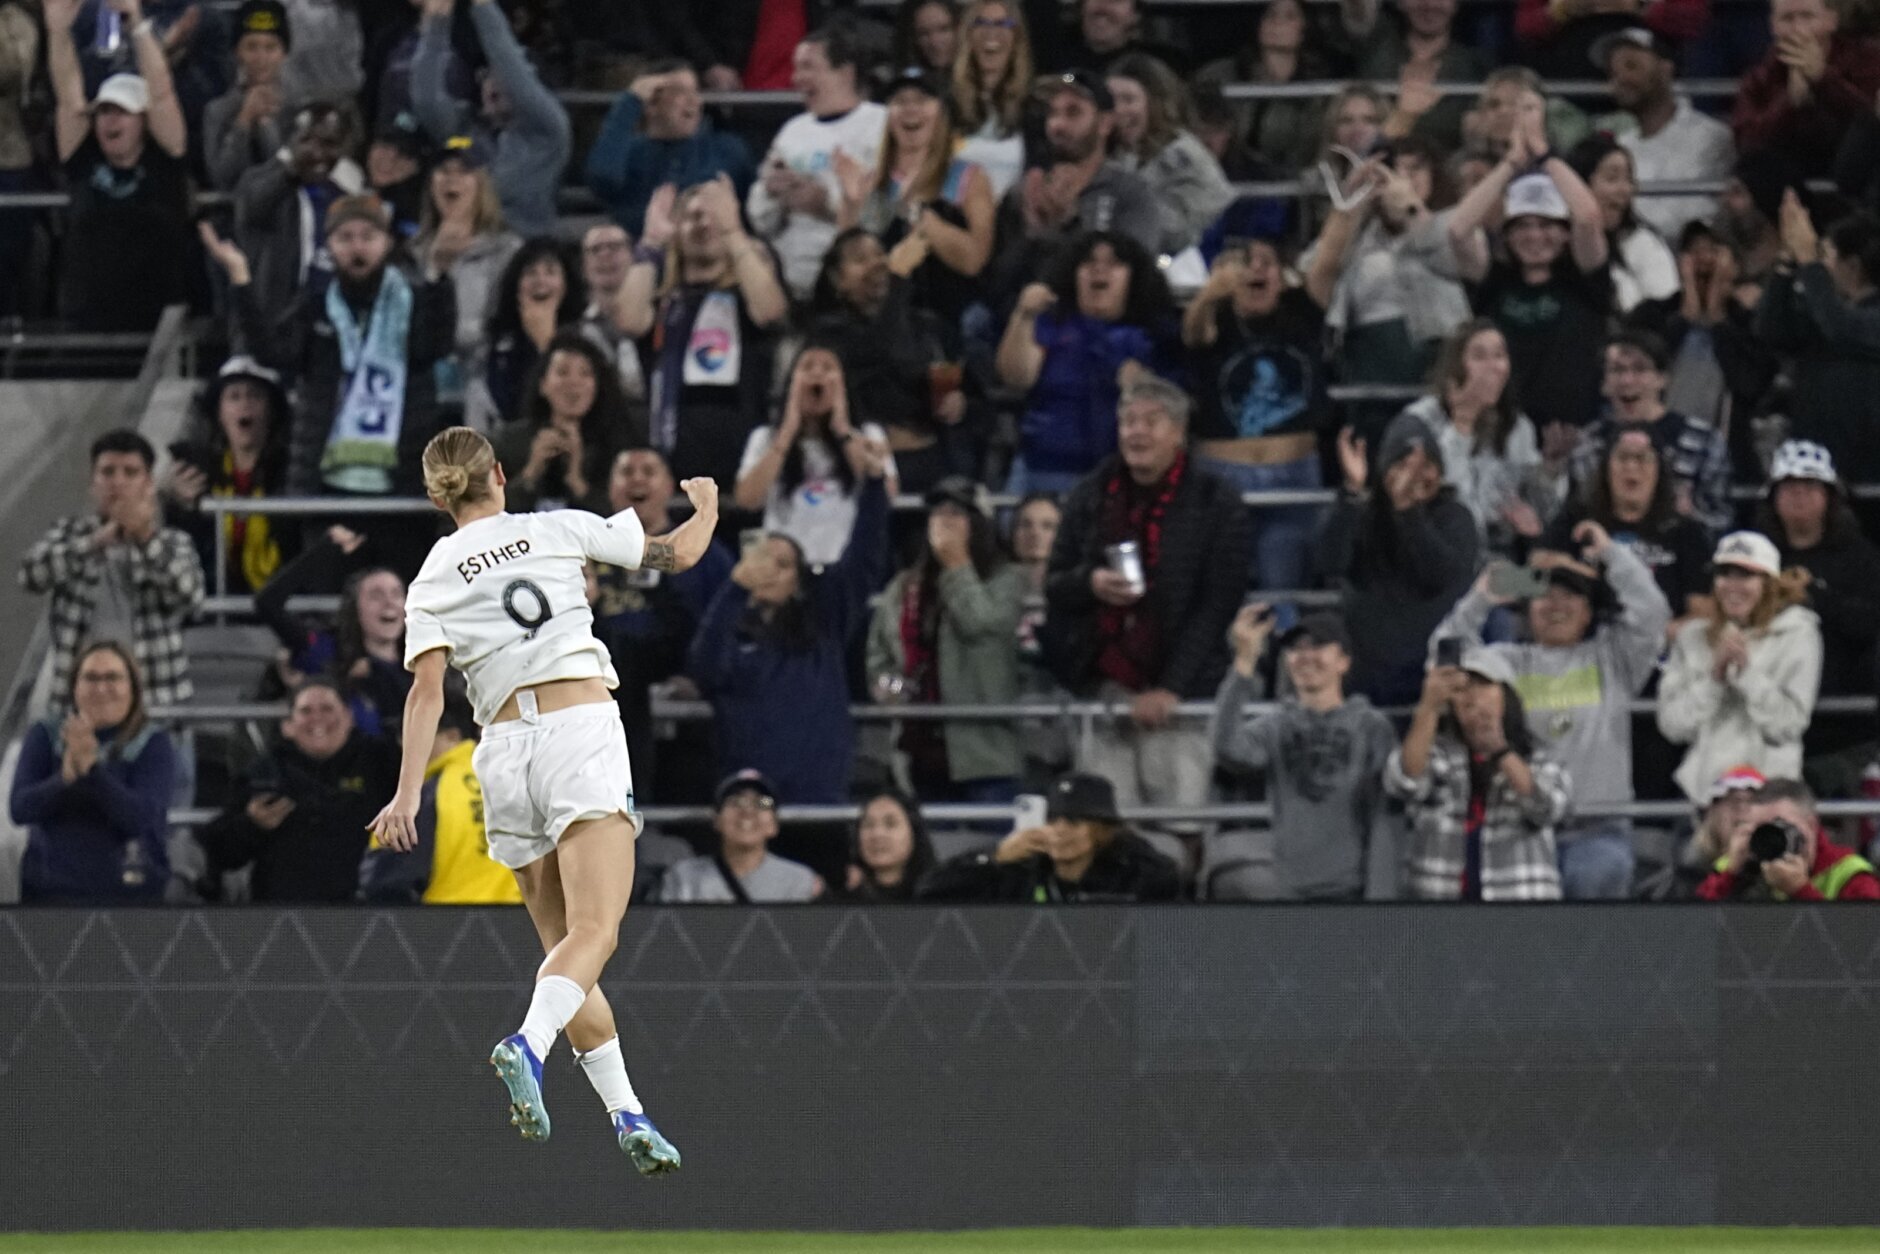 Gotham FC heads to first-ever NWSL finals after upset in Portland